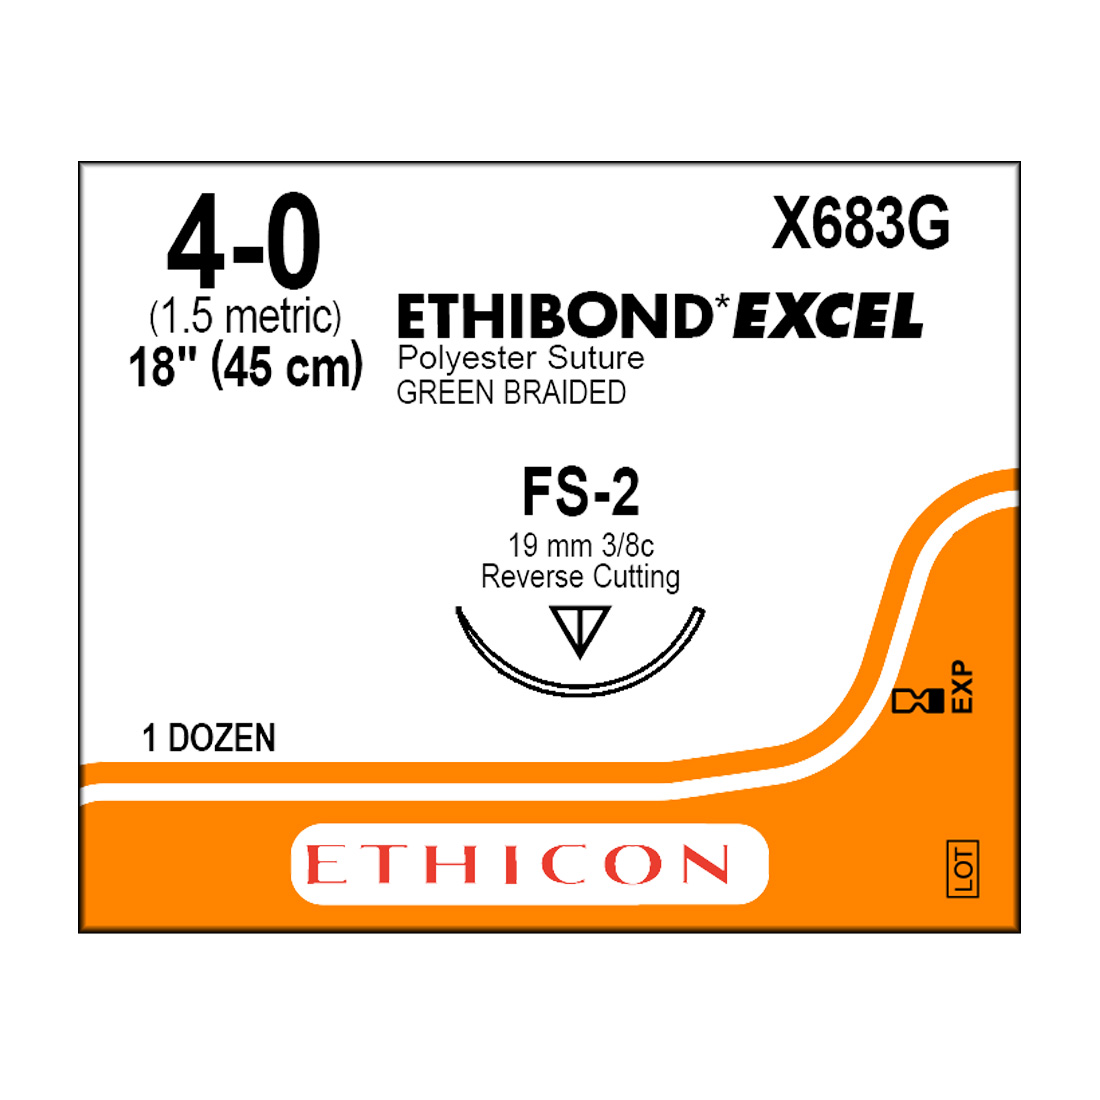 ETHIBOND EXCEL® Polyester Green Braided Sutures, 4-0, FS-2, Reverse Cutting, 18" - 12/Box